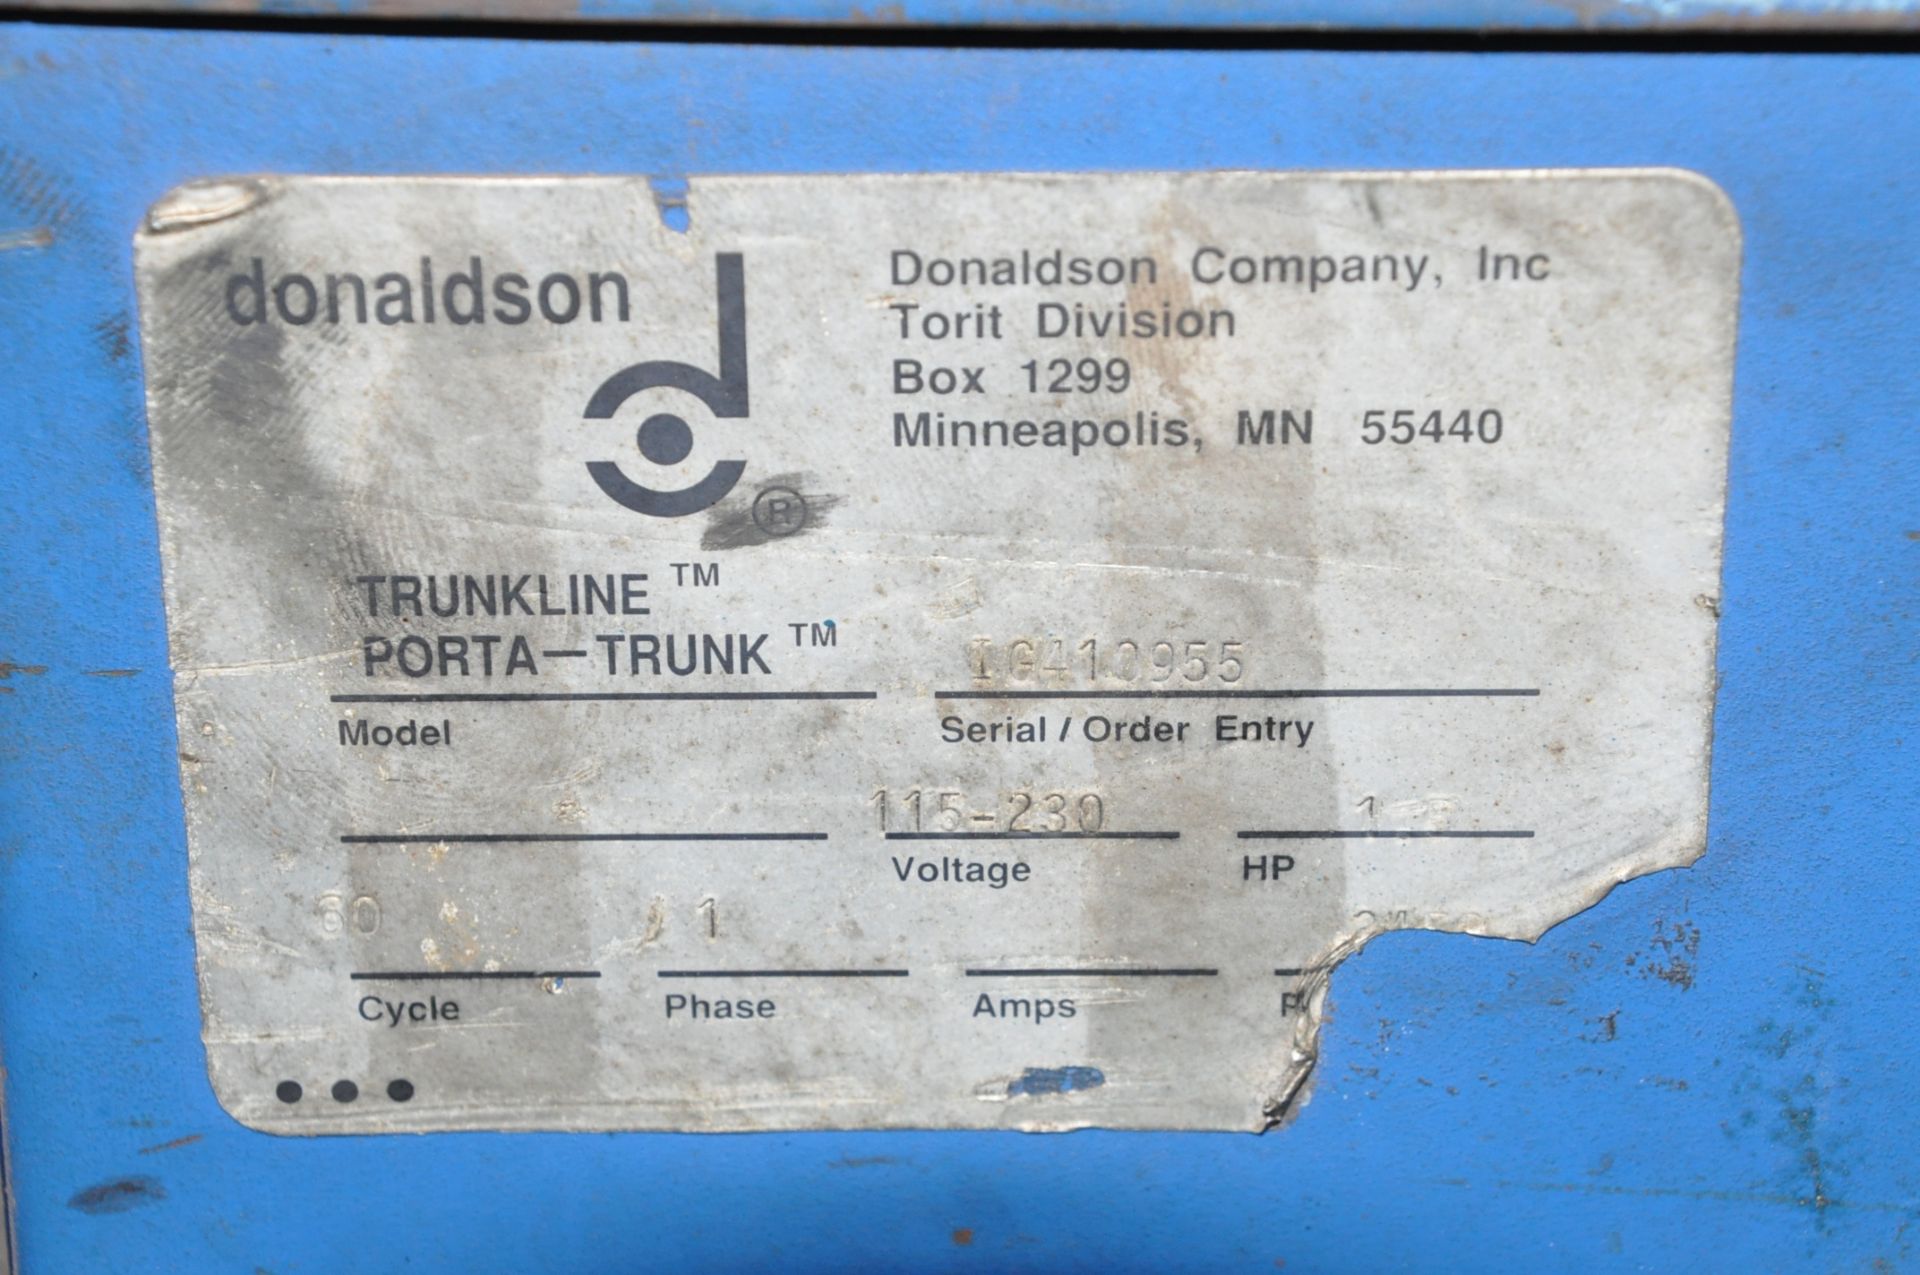 Torit Donaldson Trunk Line Porta-Trunk Snorkel Type Portable Fume Collector, S/n 1G410955, (G- - Image 2 of 2